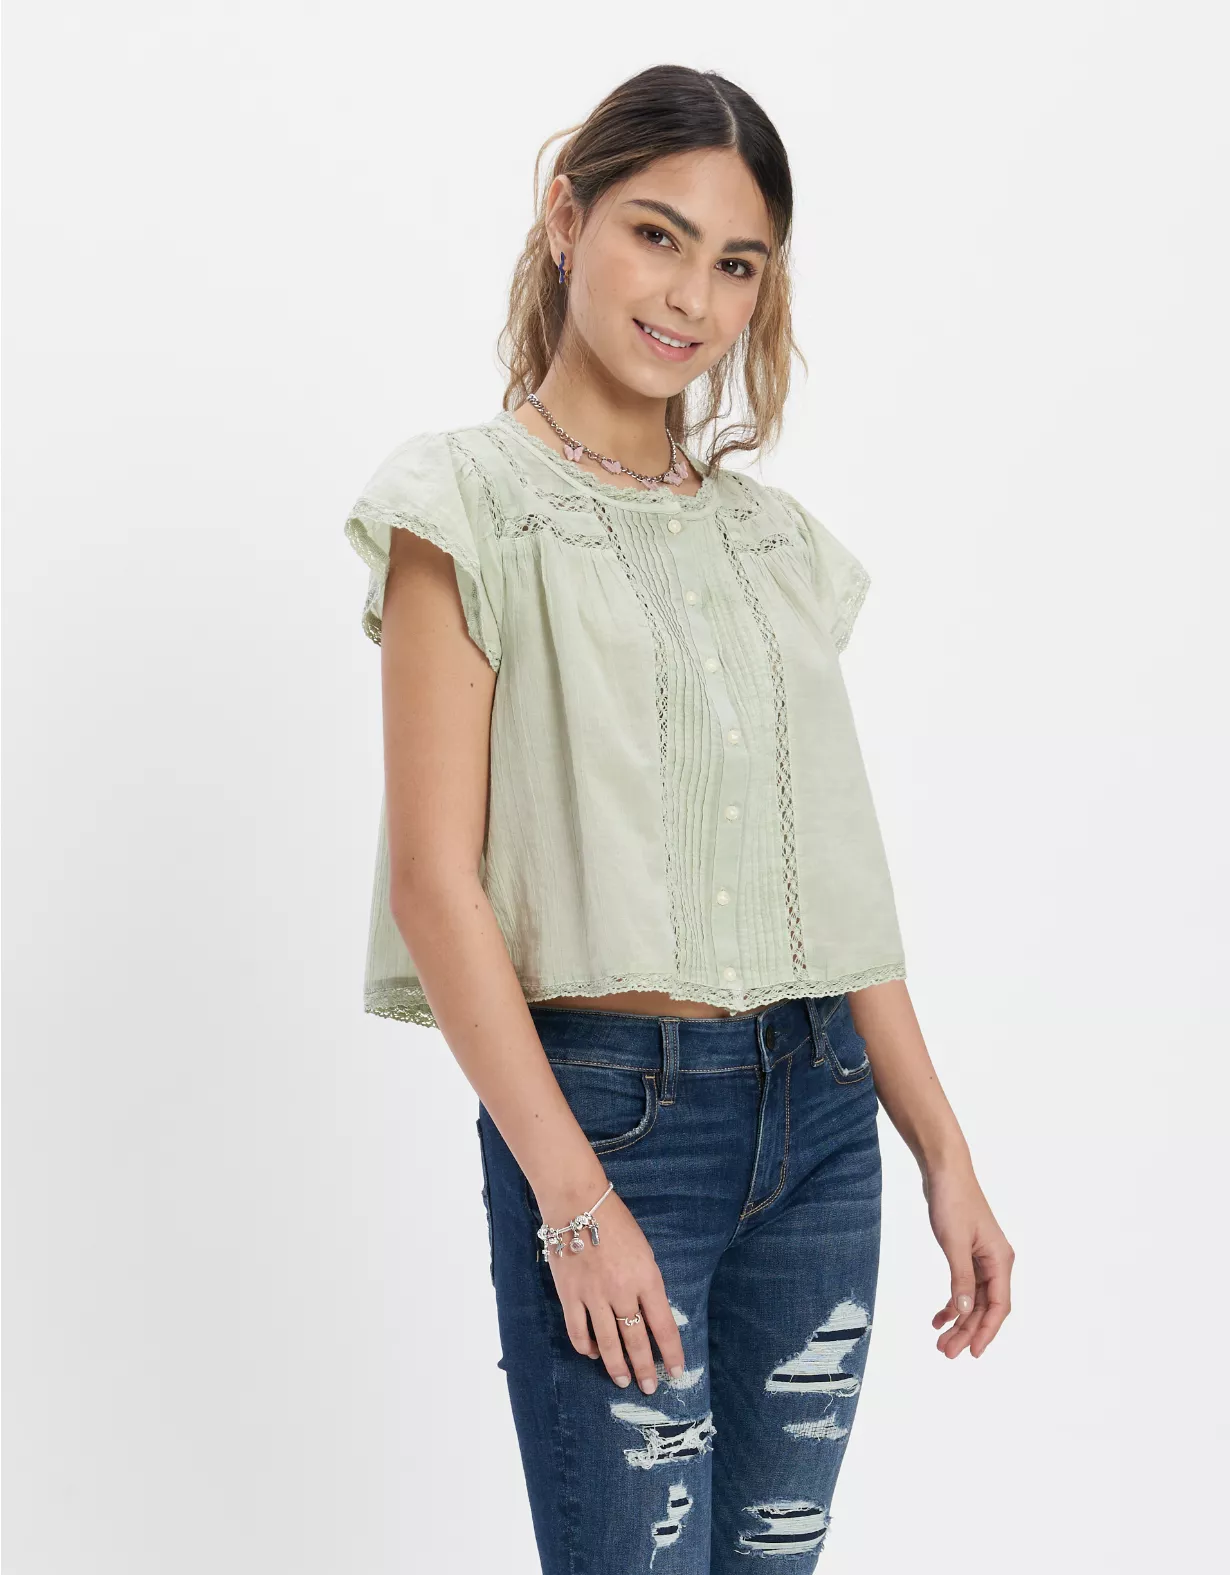 AE Cropped Short-Sleeve Bubble Blouse